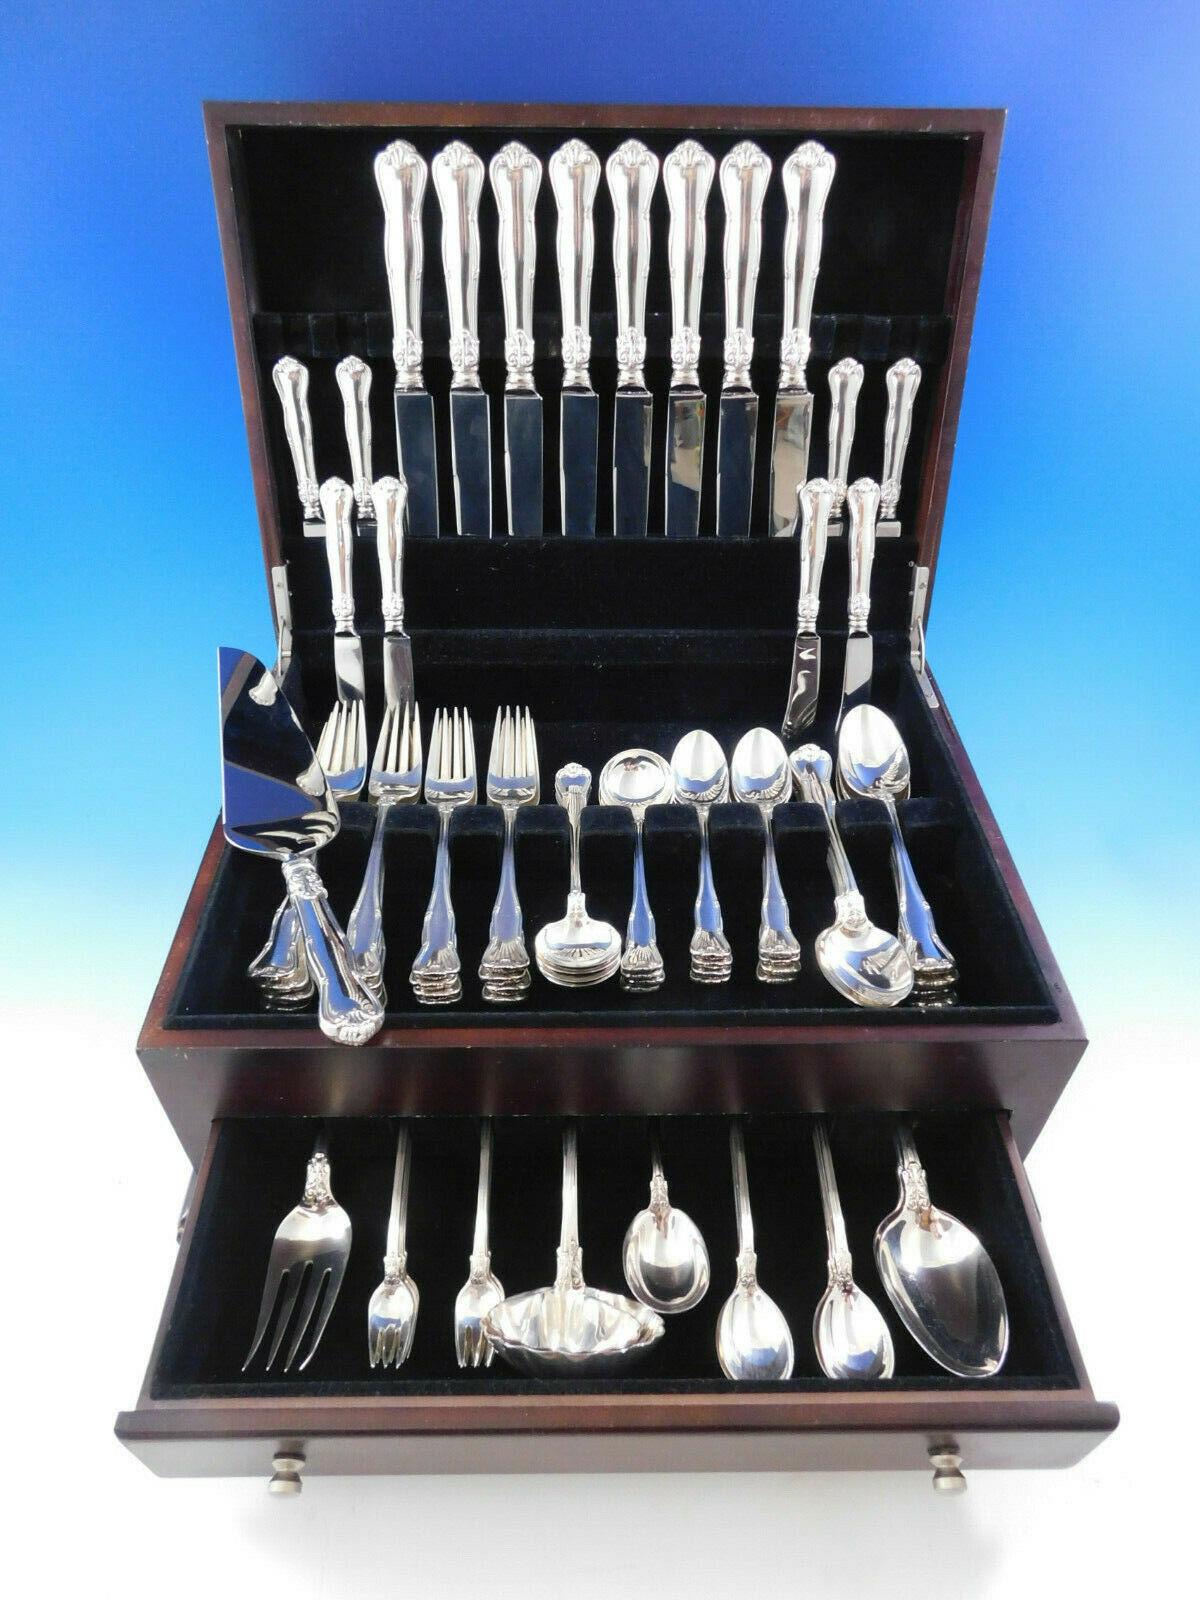 Superb Provence by Tiffany & Co. sterling silver flatware set, 79 pieces. This exceptional set includes:

8 dinner size knives, 9 1/2